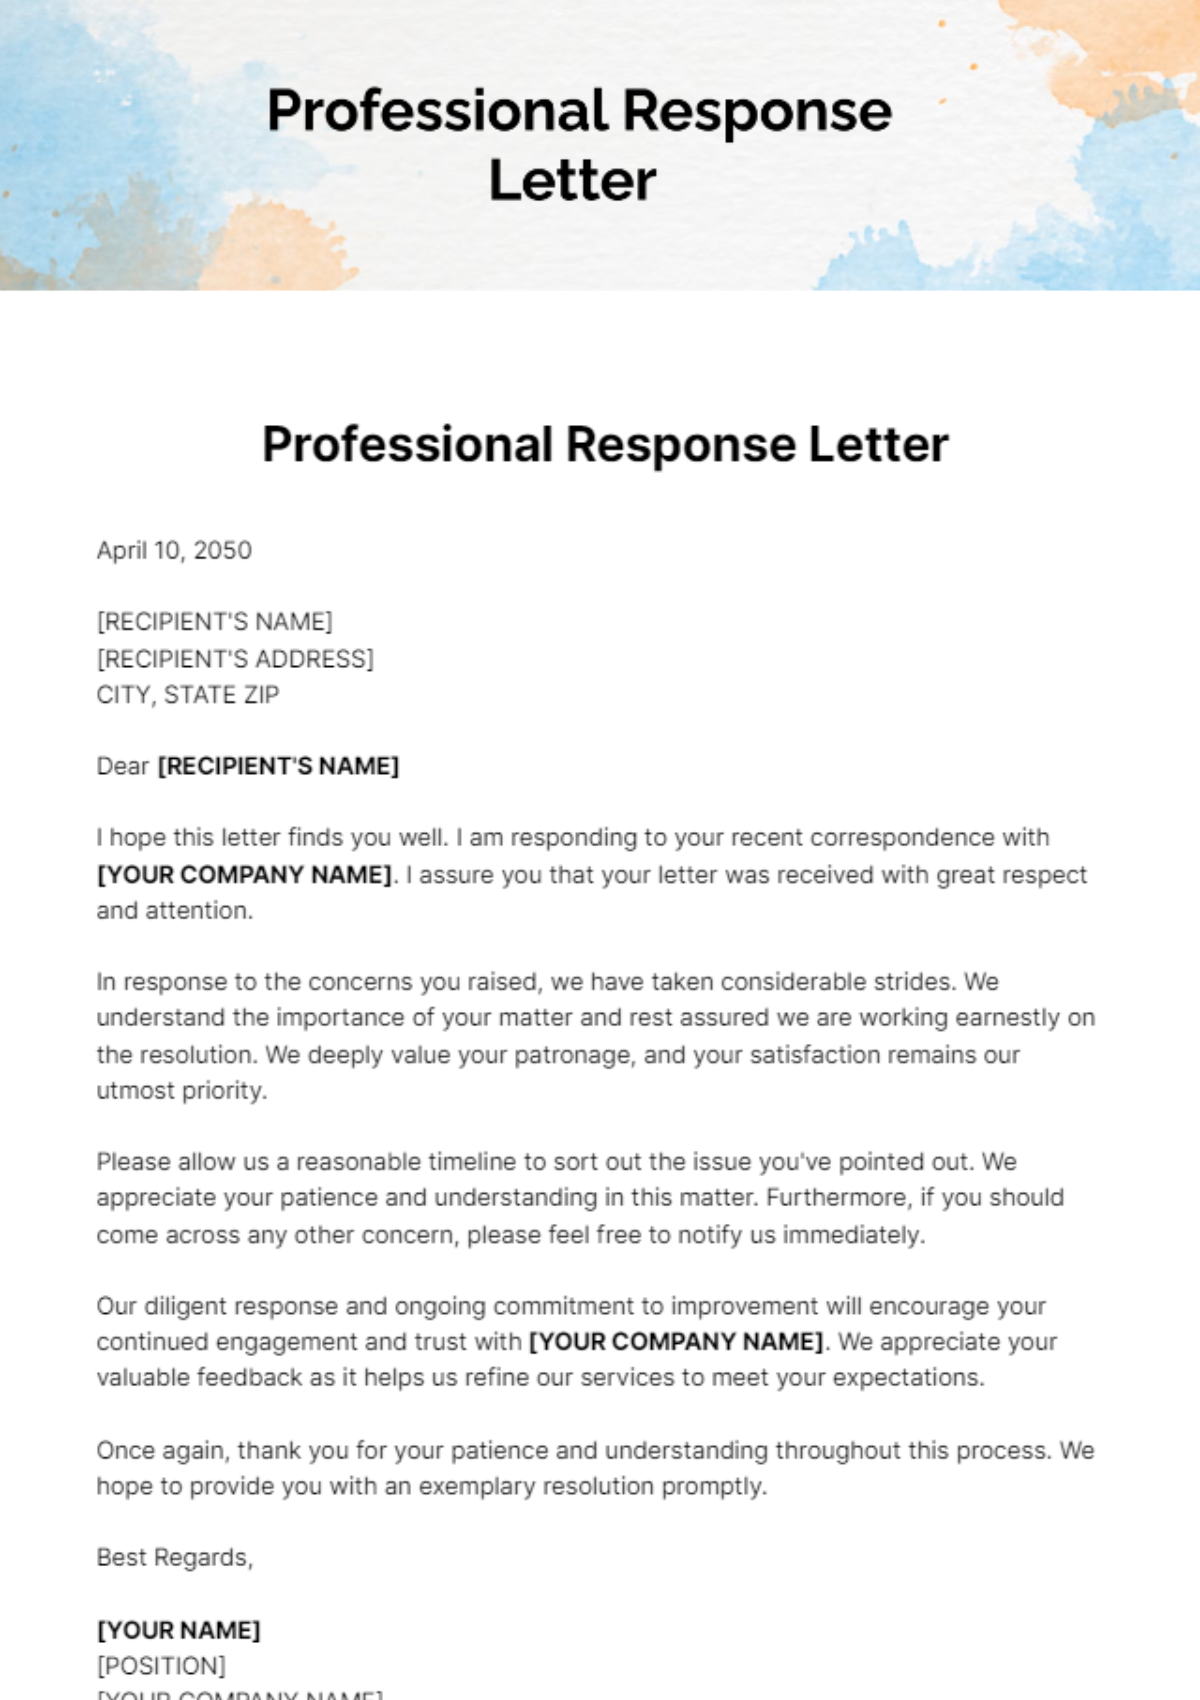 Professional Response Letter Template